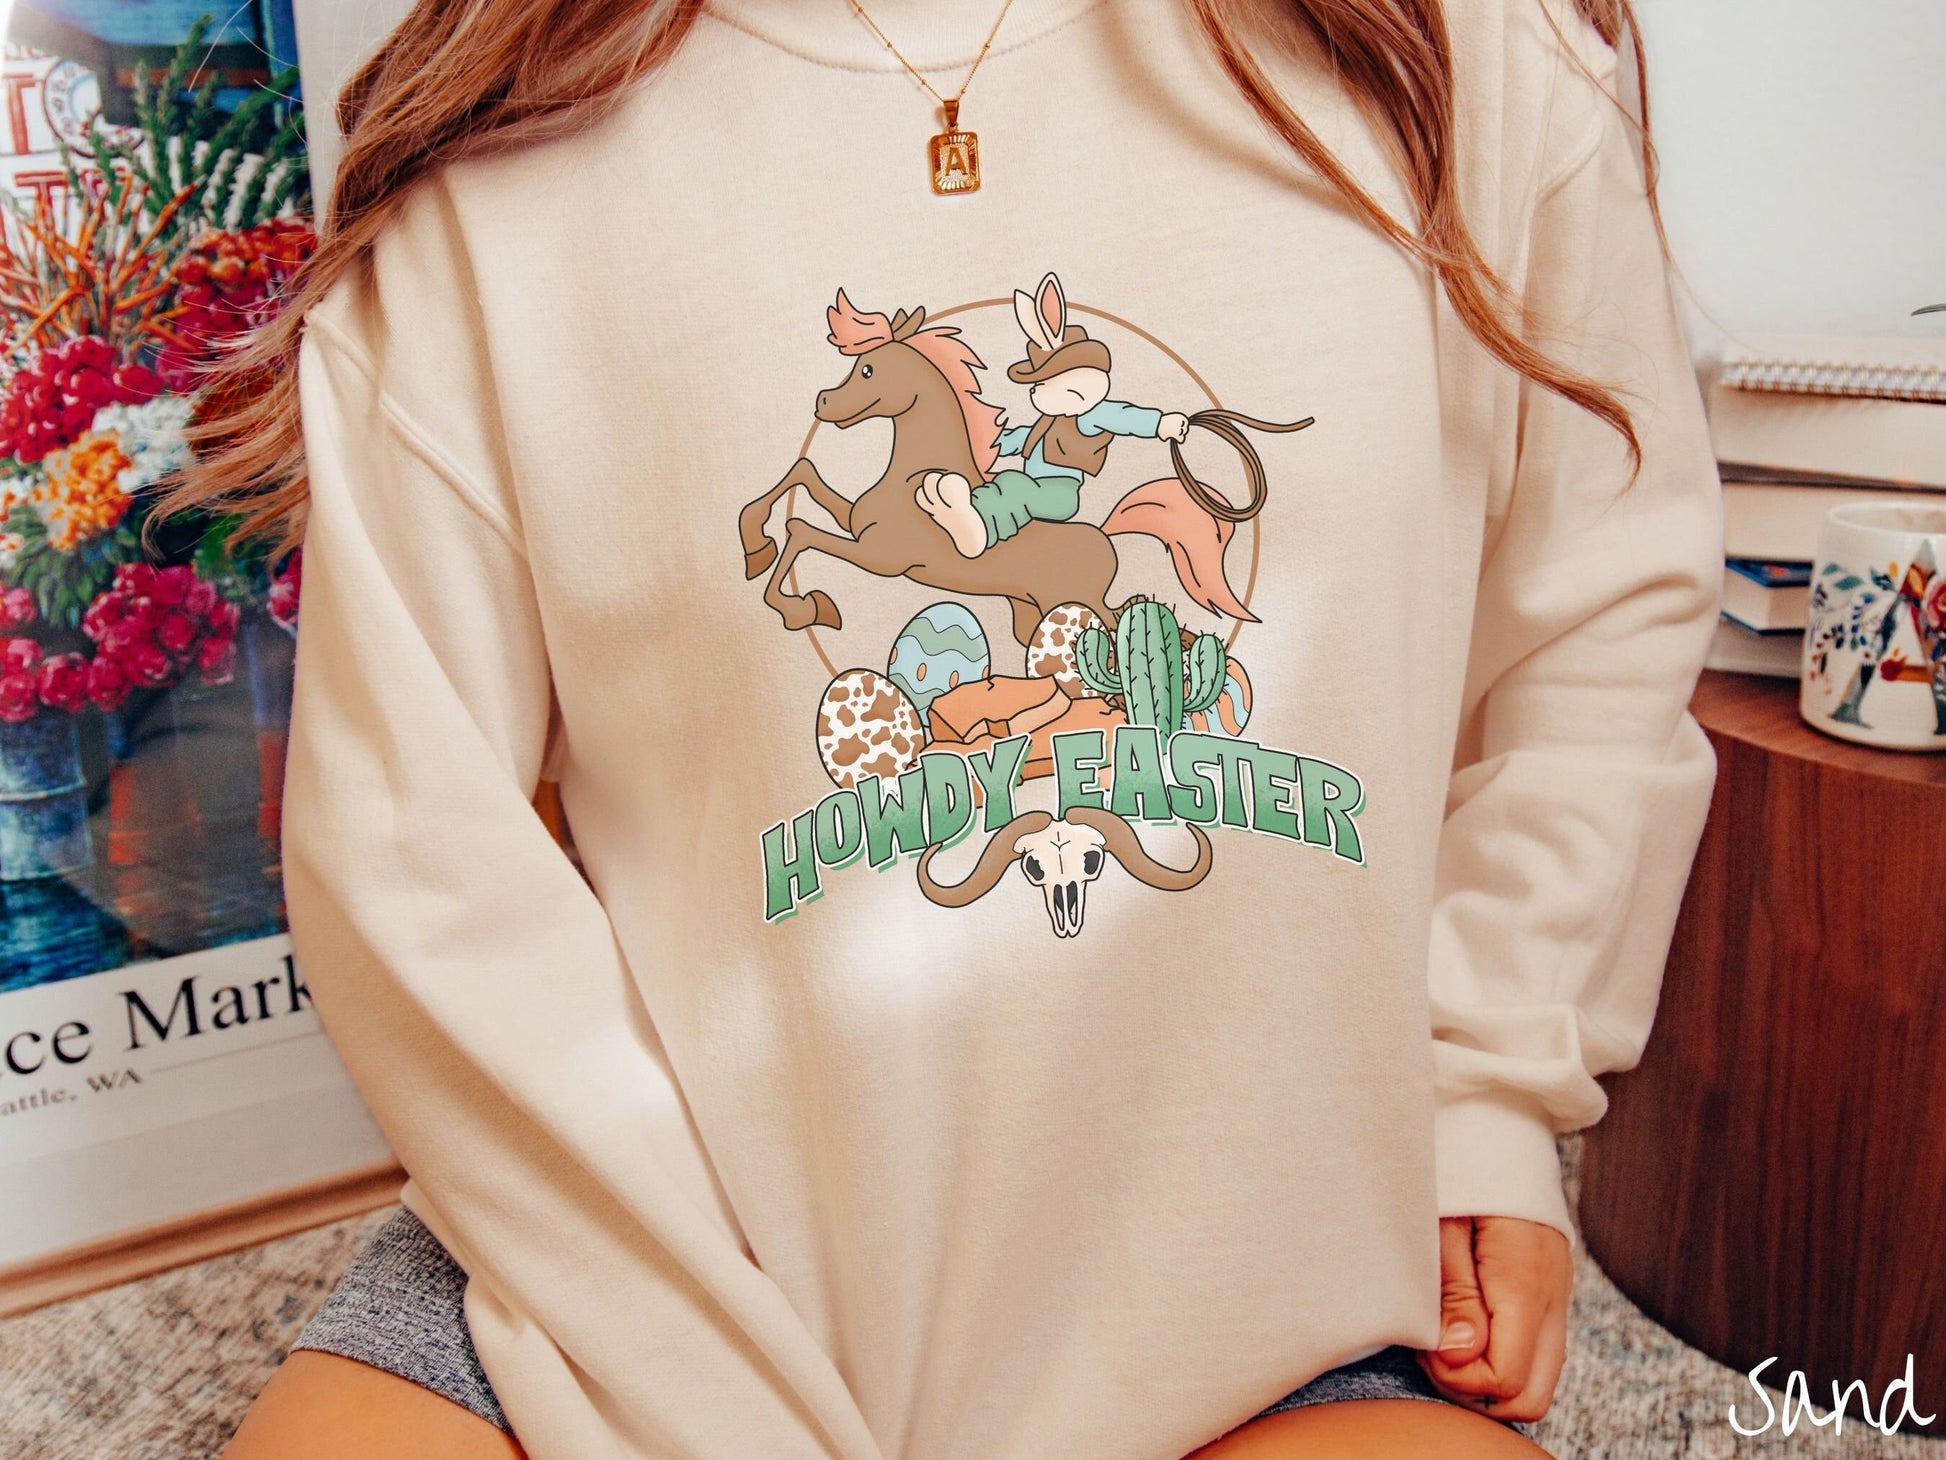 A woman wearing a cute, vintage sand colored sweatshirt with a cowboy rabbit riding a bucking, brown horse while holding a lasso rope. Below this is the green text Howdy Easter along with colorful Easter eggs, a green cactus, and a horned bull skull.